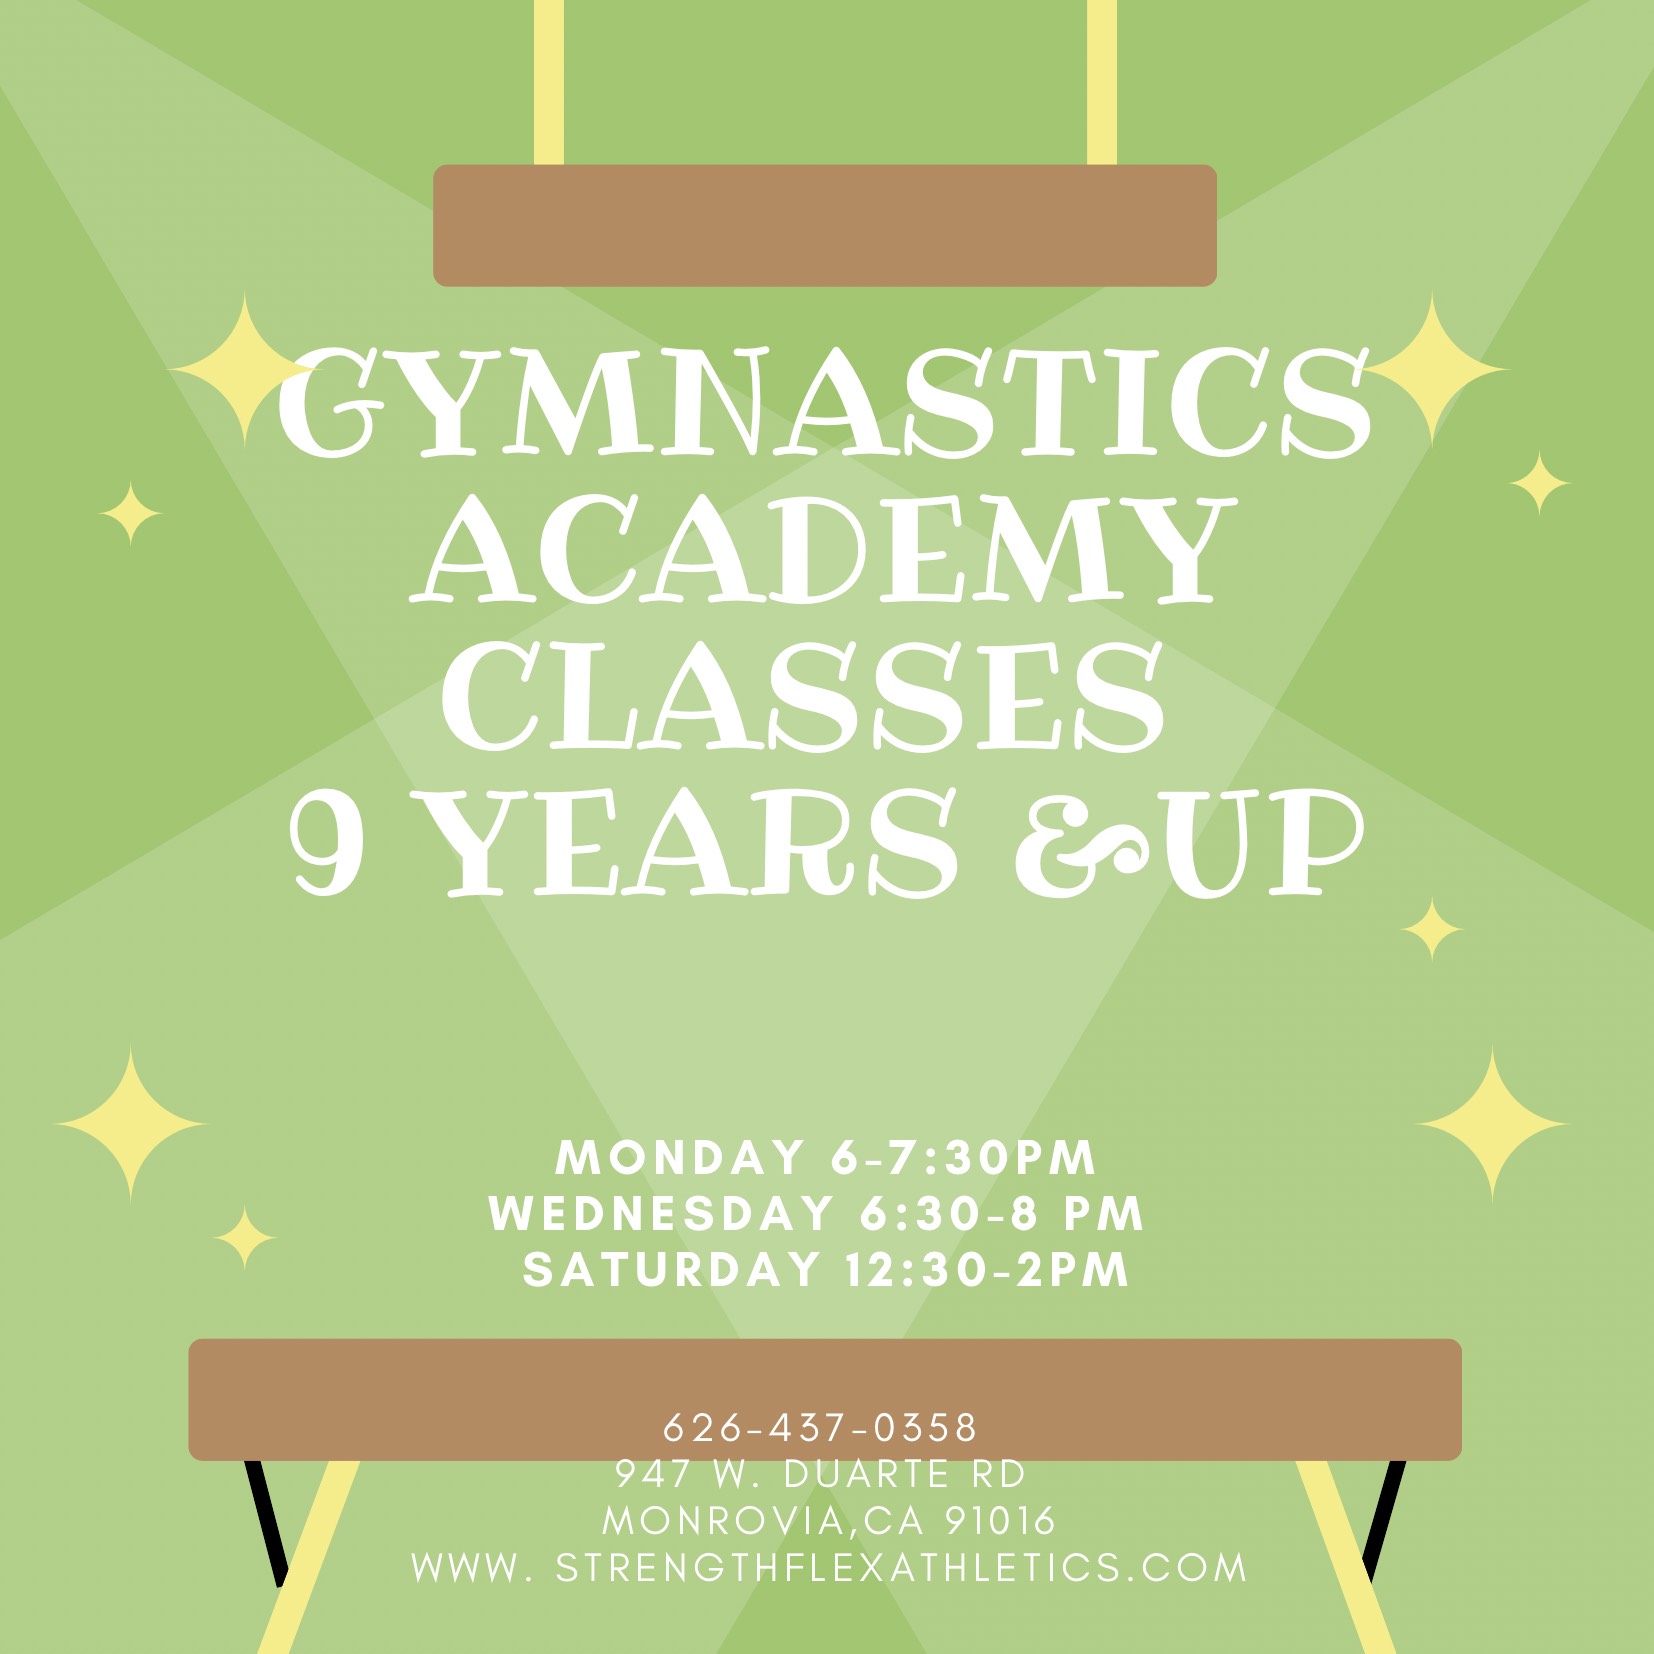 Strengthflex Gymnastics Academy Classes for 9 year olds and up